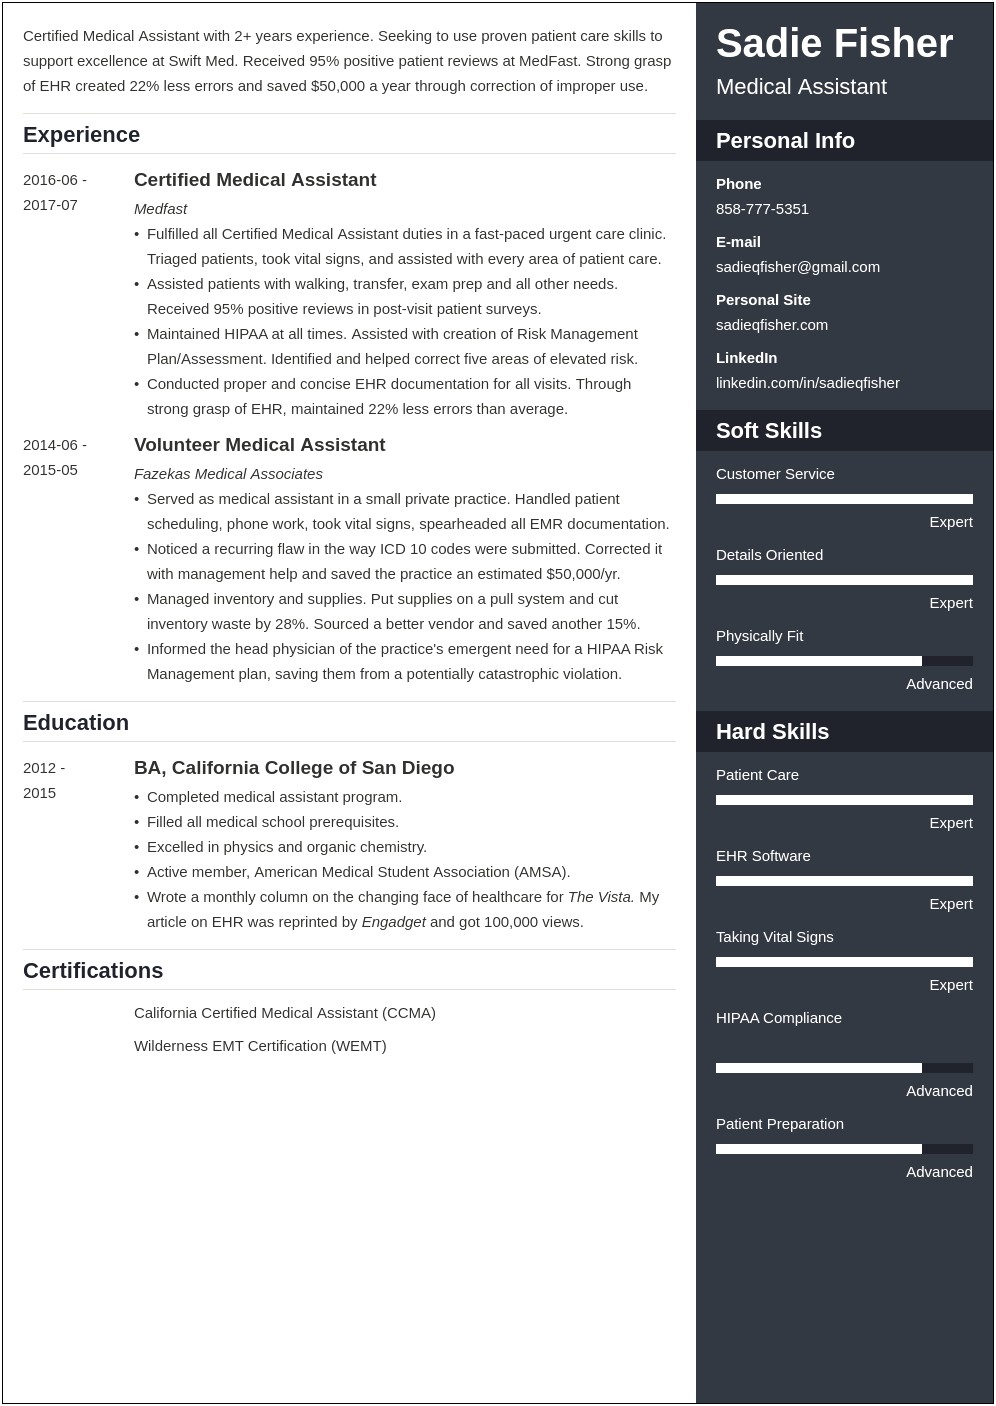 Resume Examples For Medical Assistant Jobs